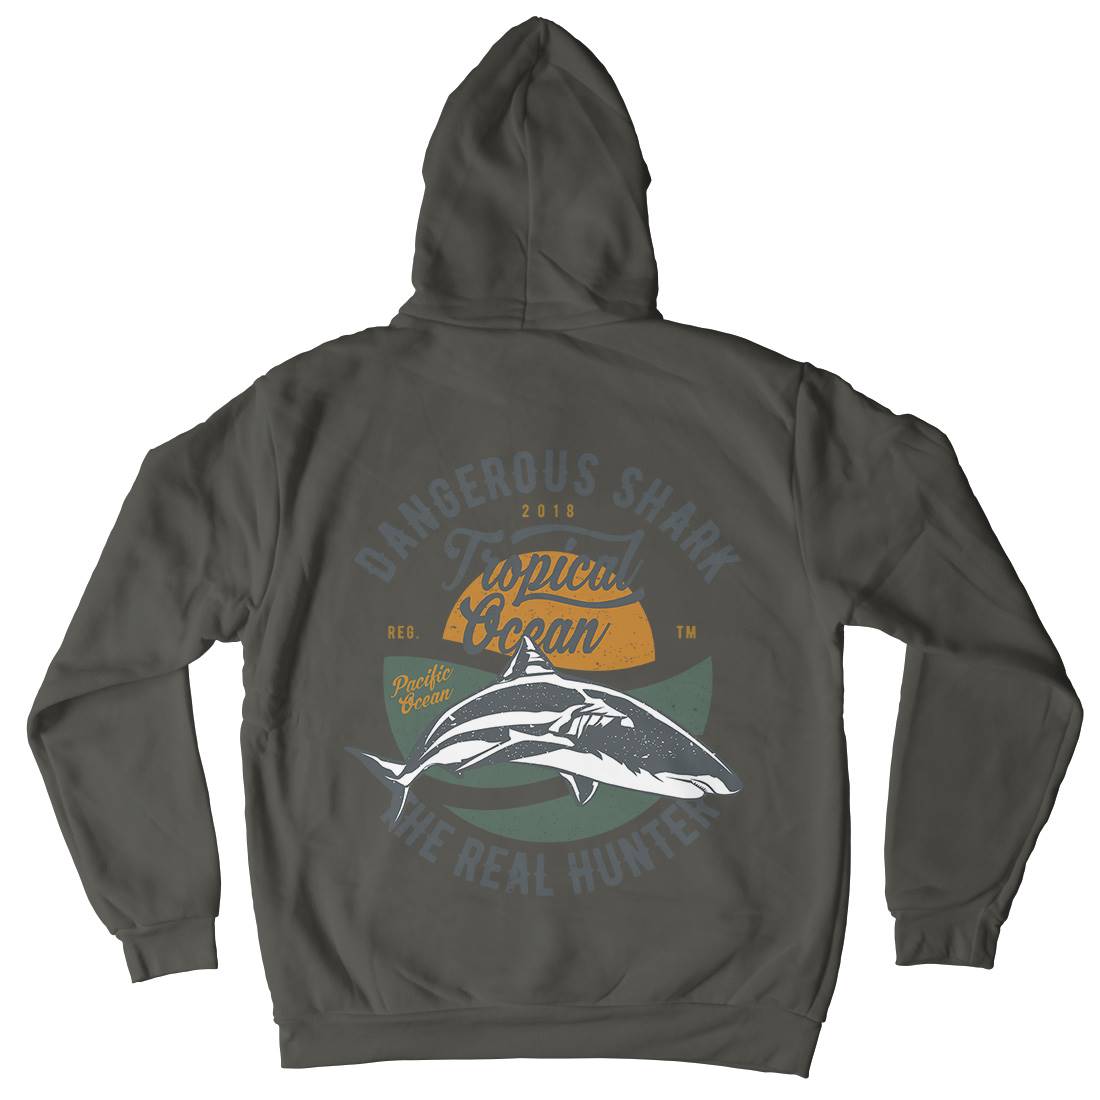 Dangerous Shark Mens Hoodie With Pocket Navy A643